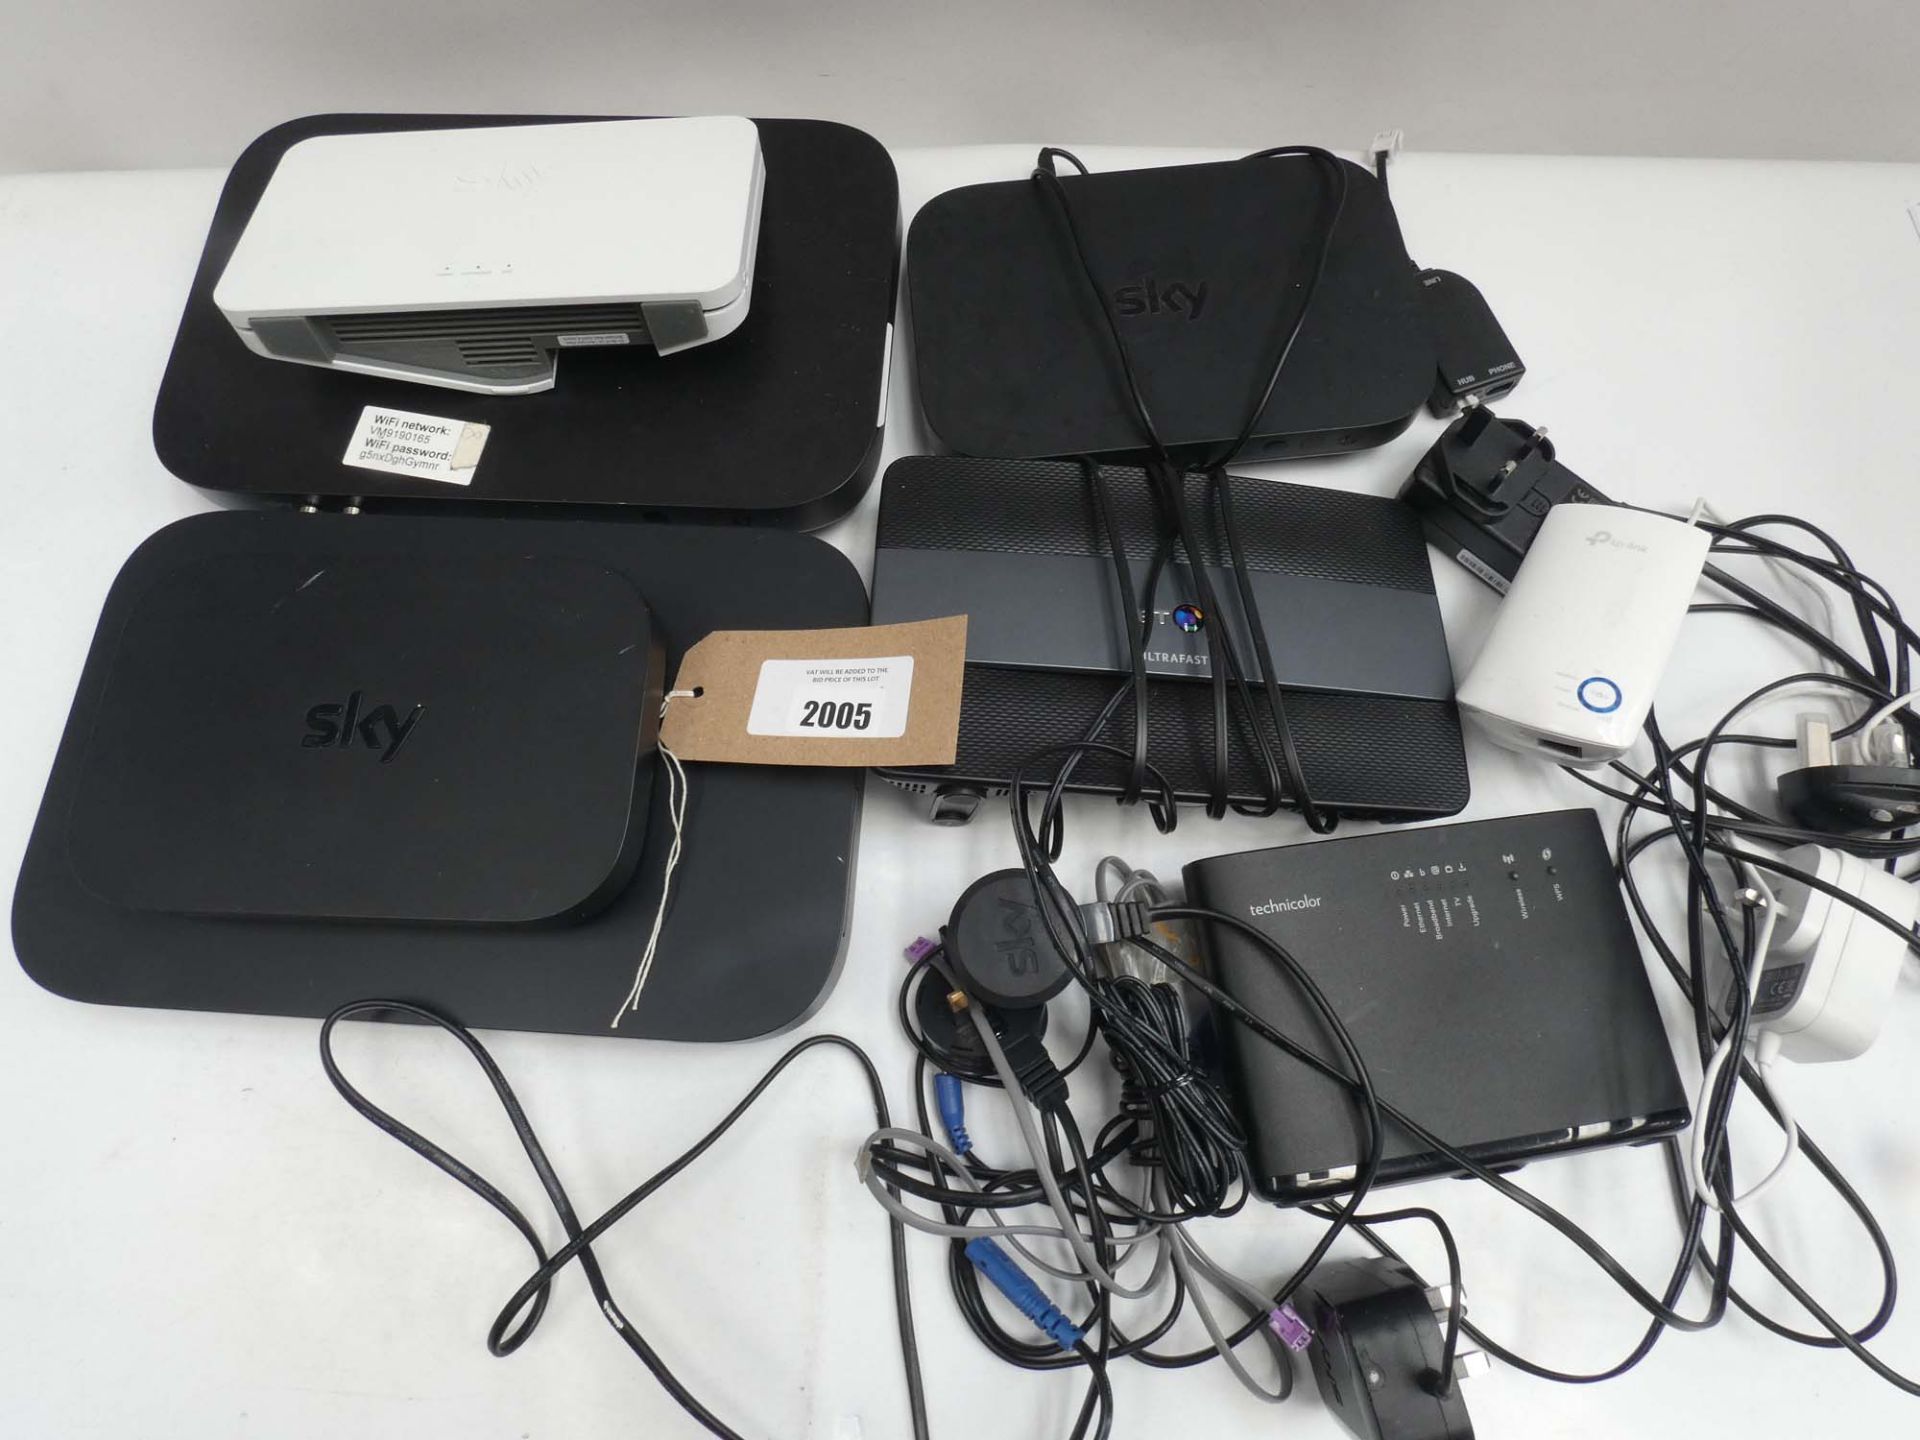 Bag containing quantity of routers/hubs/TV boxes